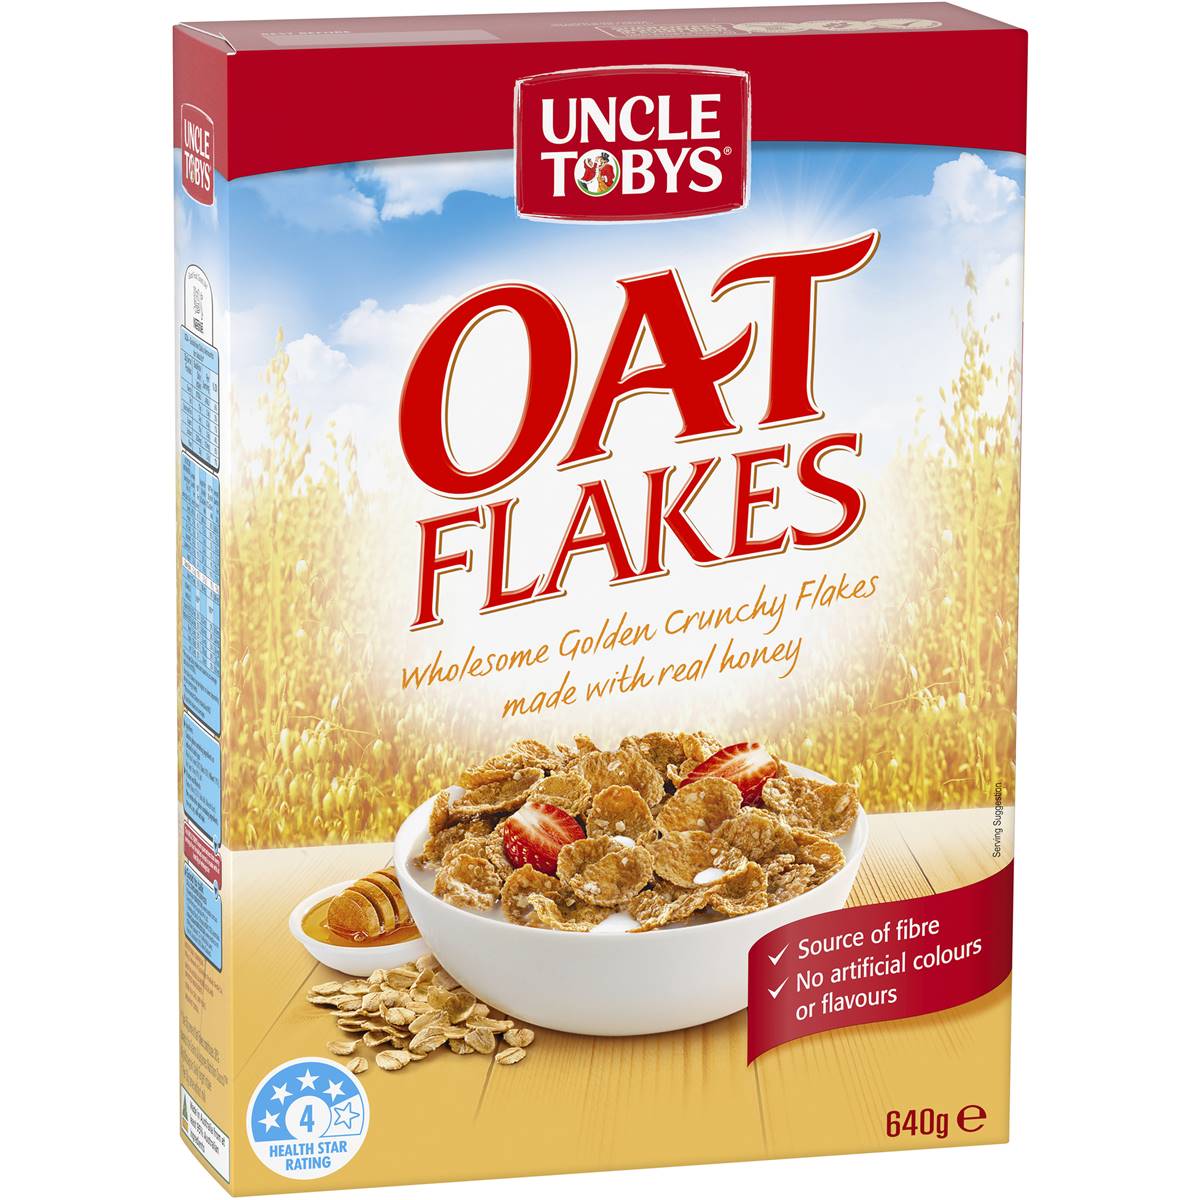 Calories in Uncle Tobys Oat Flakes Breakfast Cereal Flakes